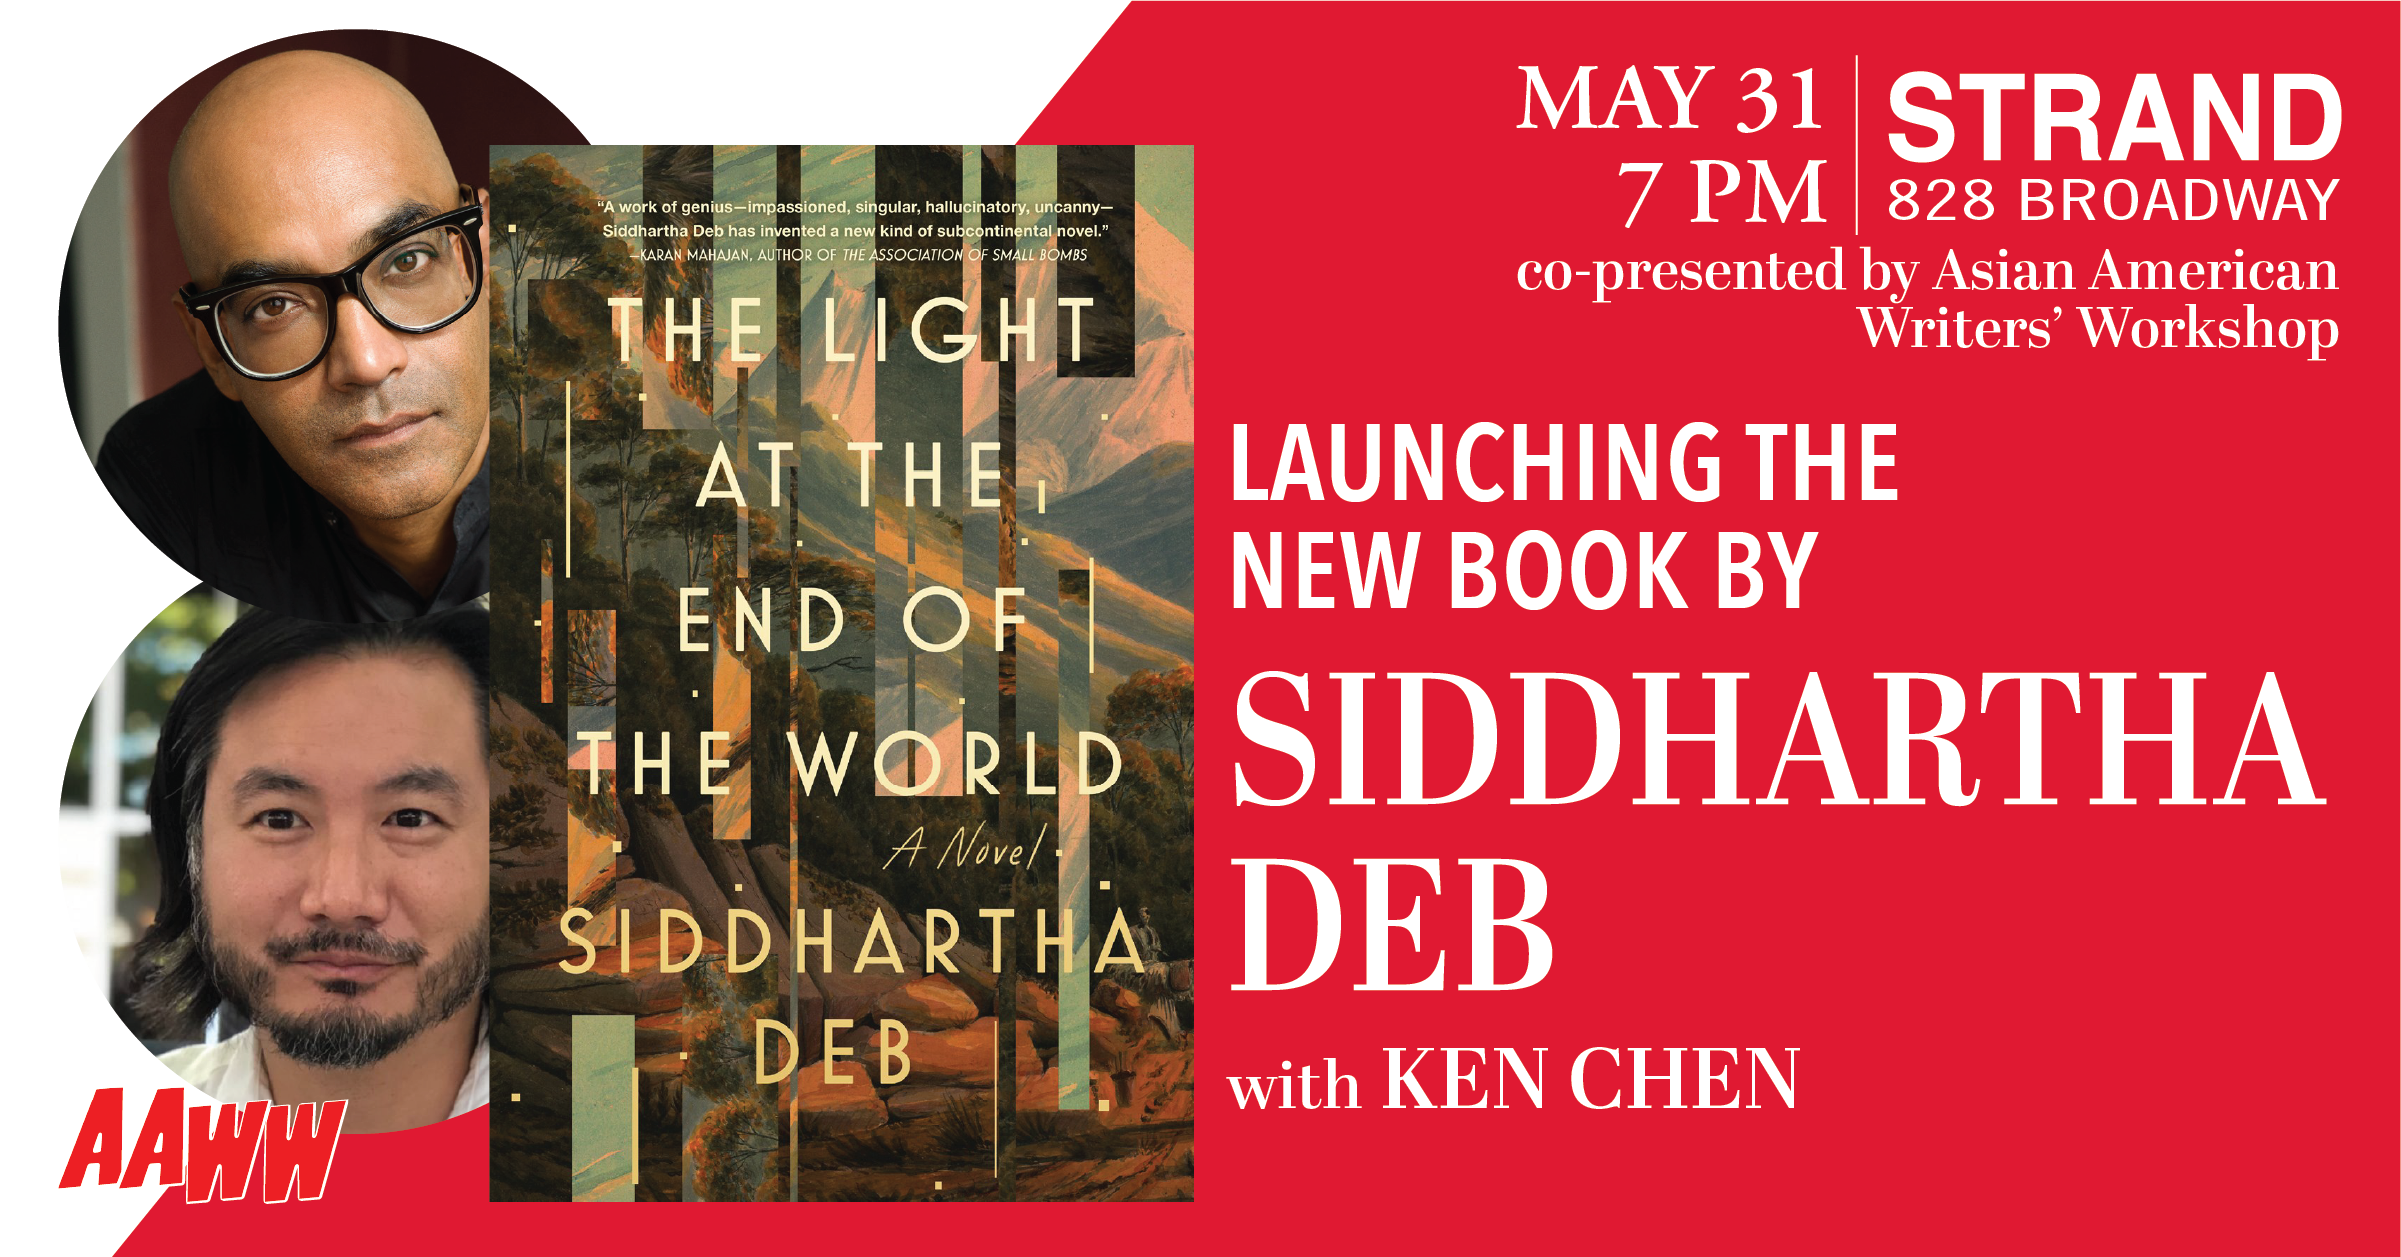 AAWW & The Strand Present: The Light at the End of the World by Siddhartha Deb with Ken Chen